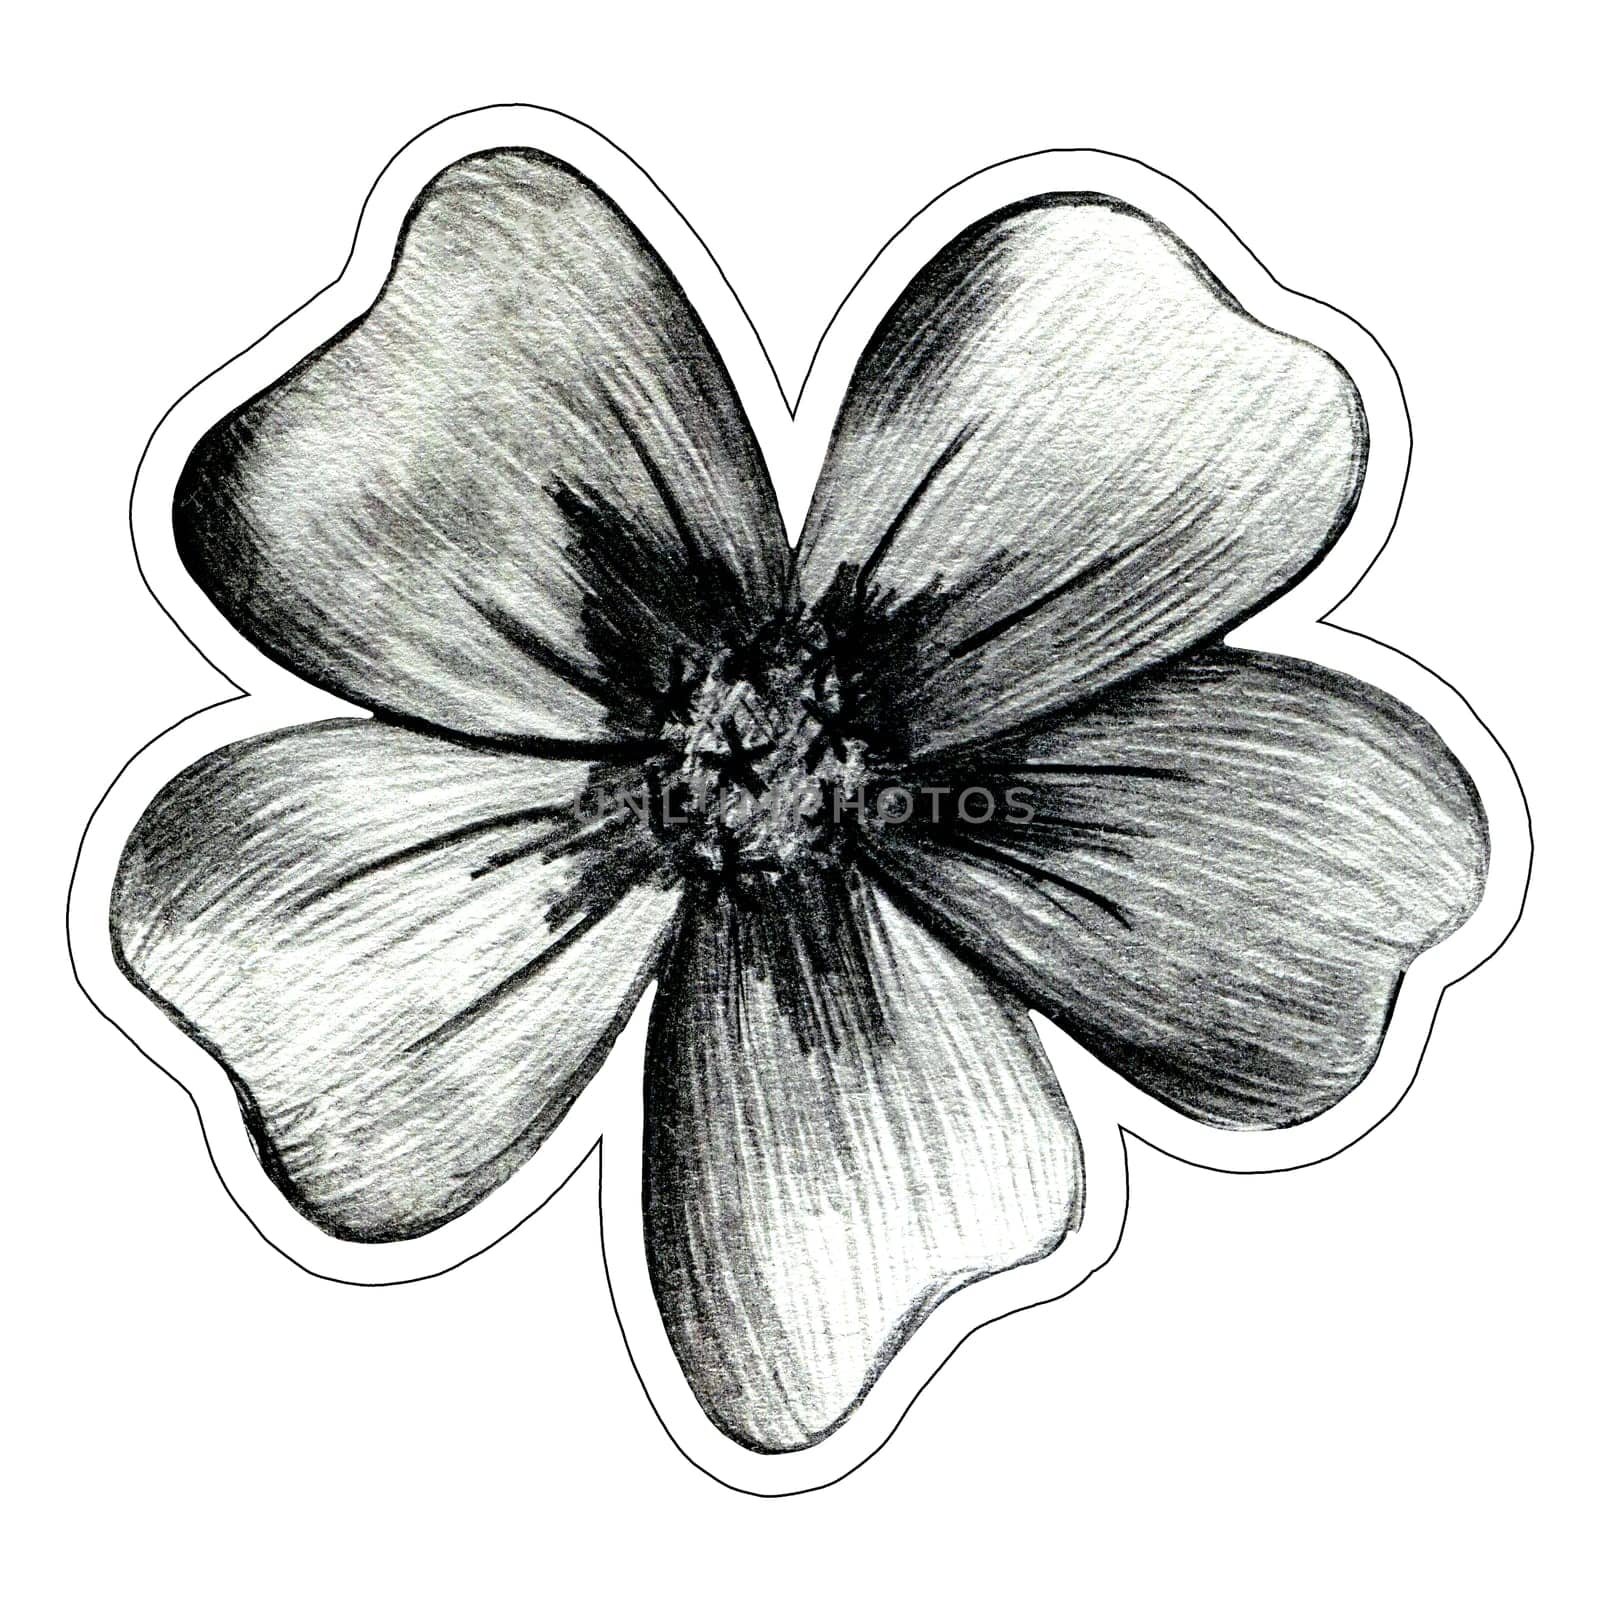 Black and White Hand Drawn Marigold Flower Sticker Isolated on White Background. Marigold Flower Drawn by Black Pencil.